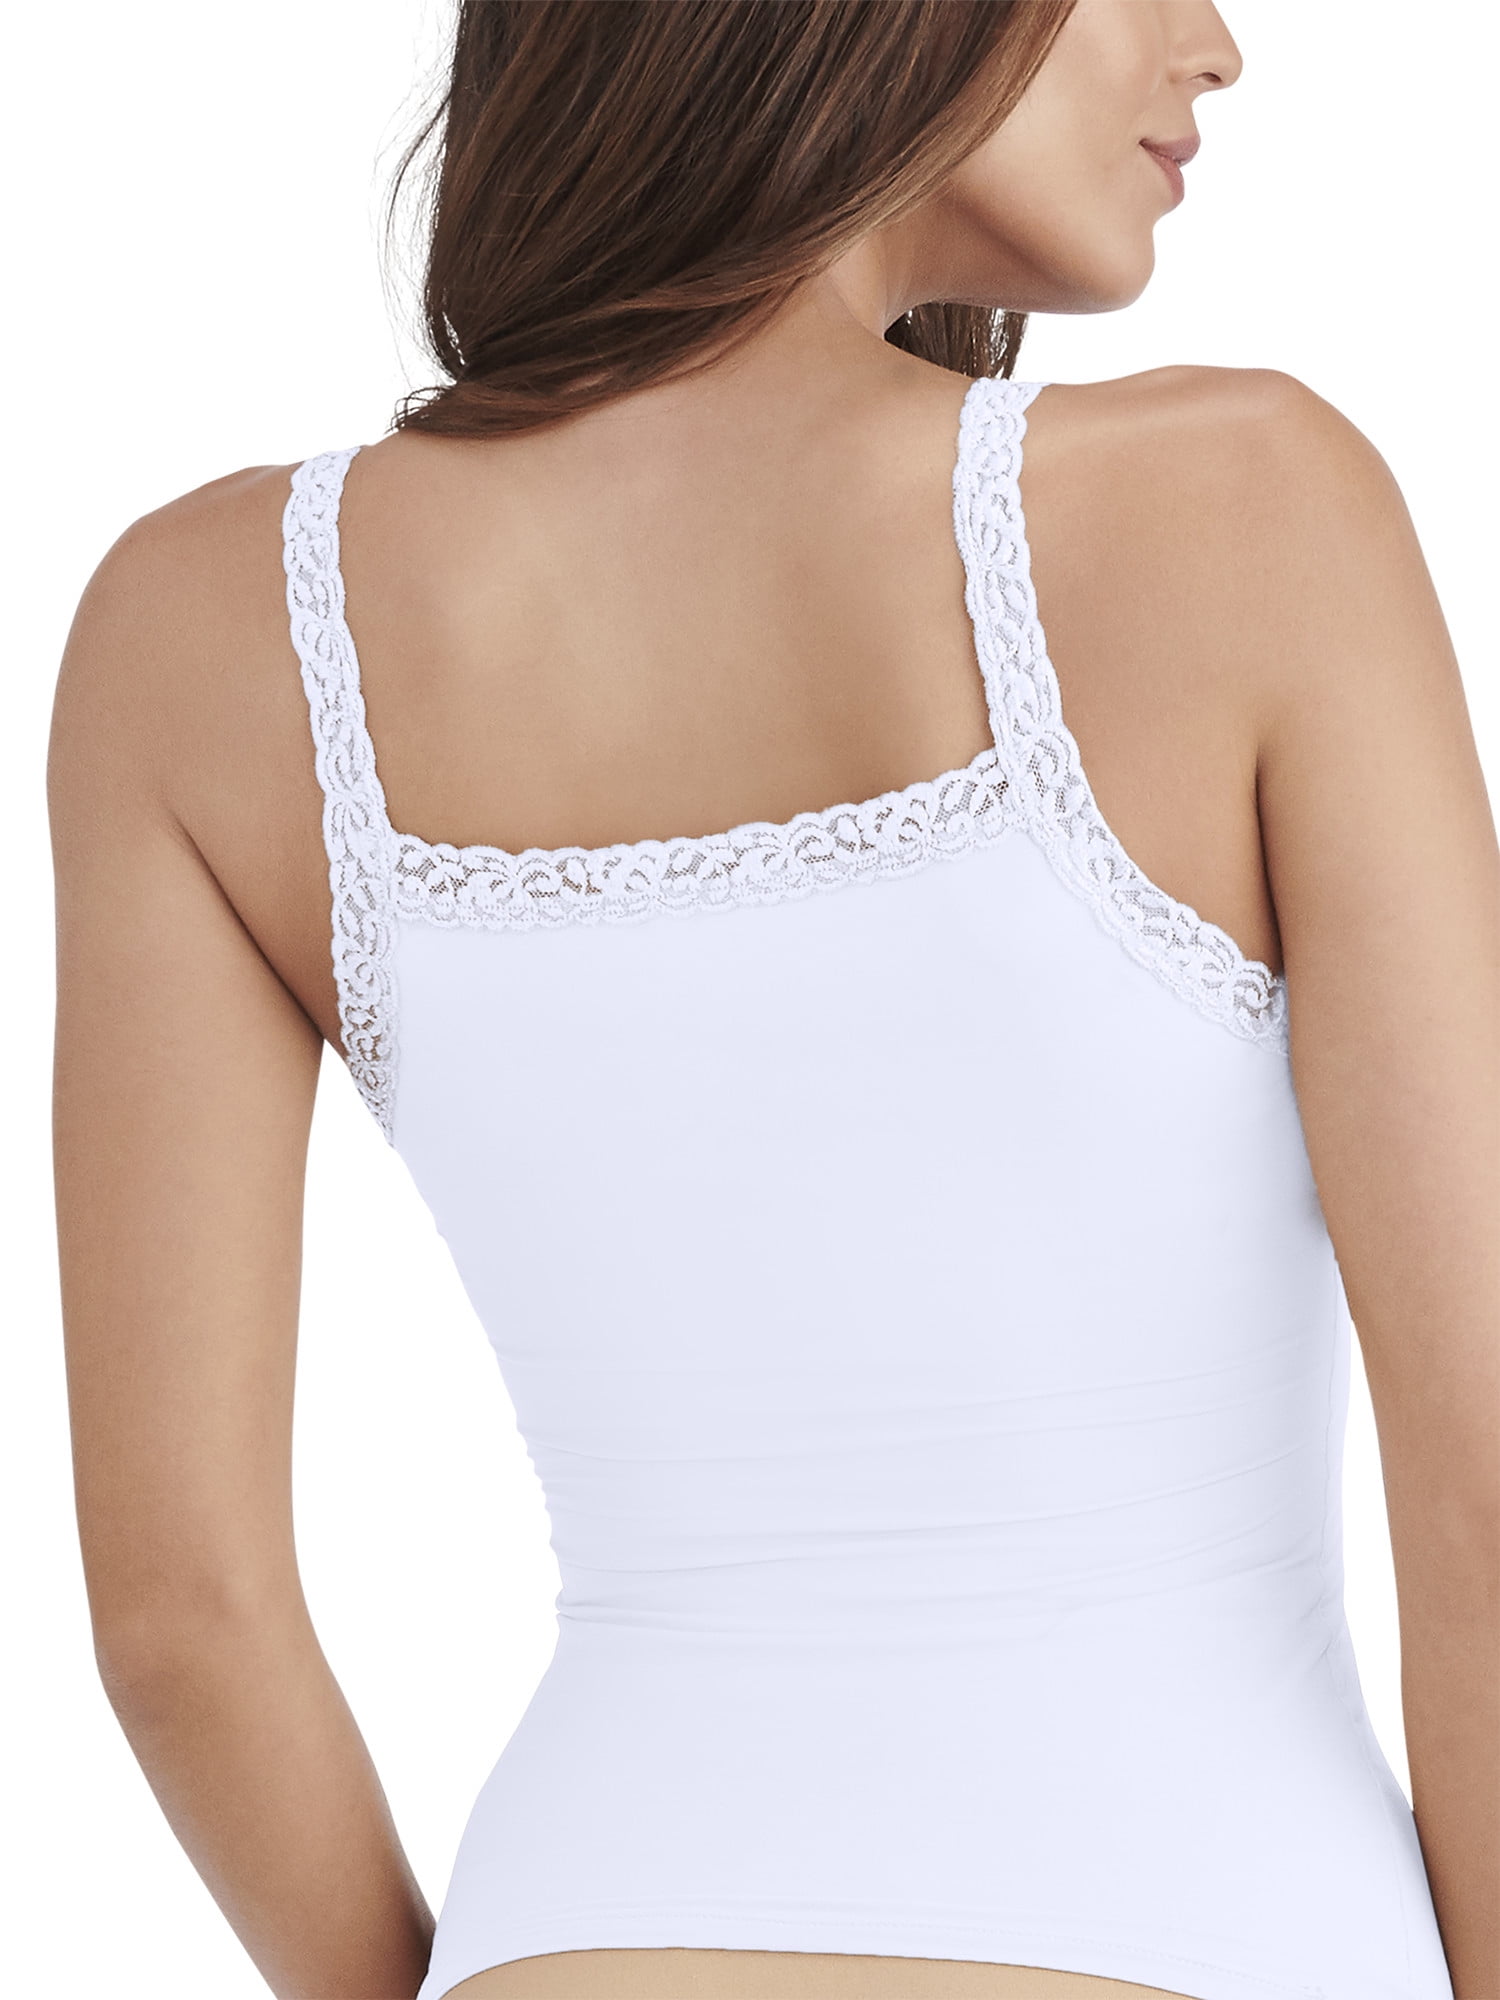 Vanity Fair Women's Smoothing Camisole 17195, Latte, Small at   Women's Clothing store